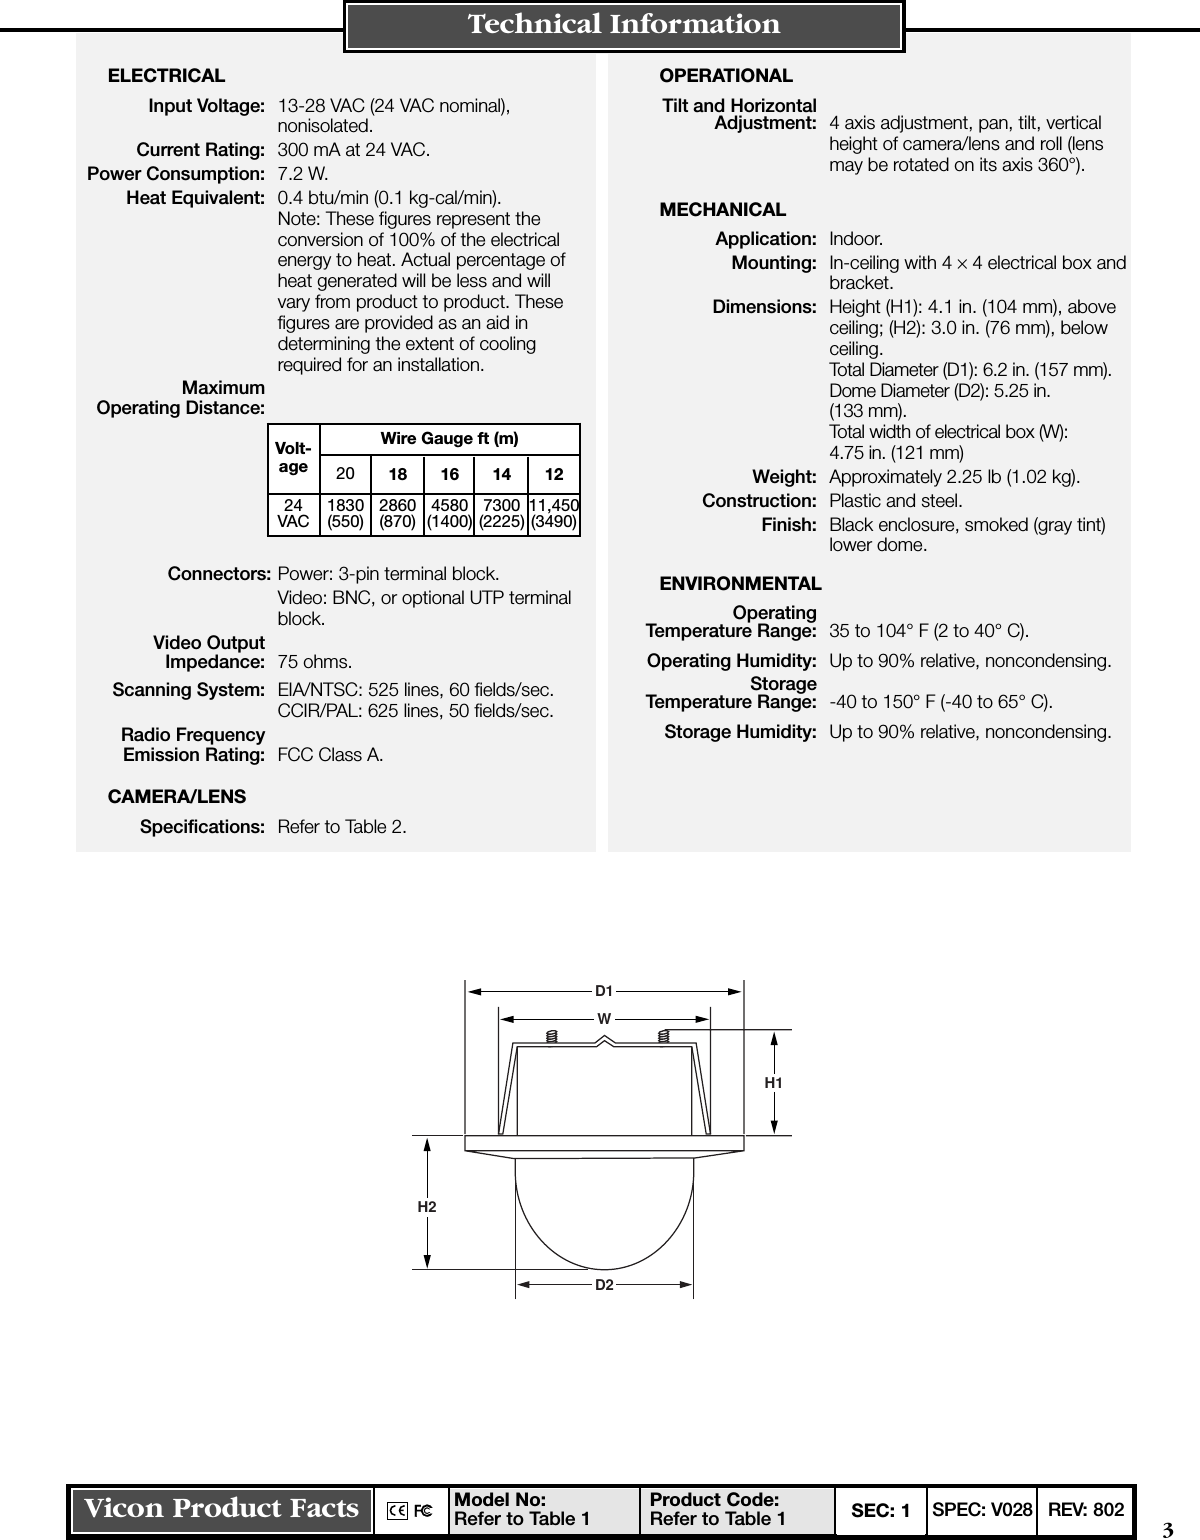 Page 3 of 5 - Security V028-01-00 Spec 028-01-00 User Manual